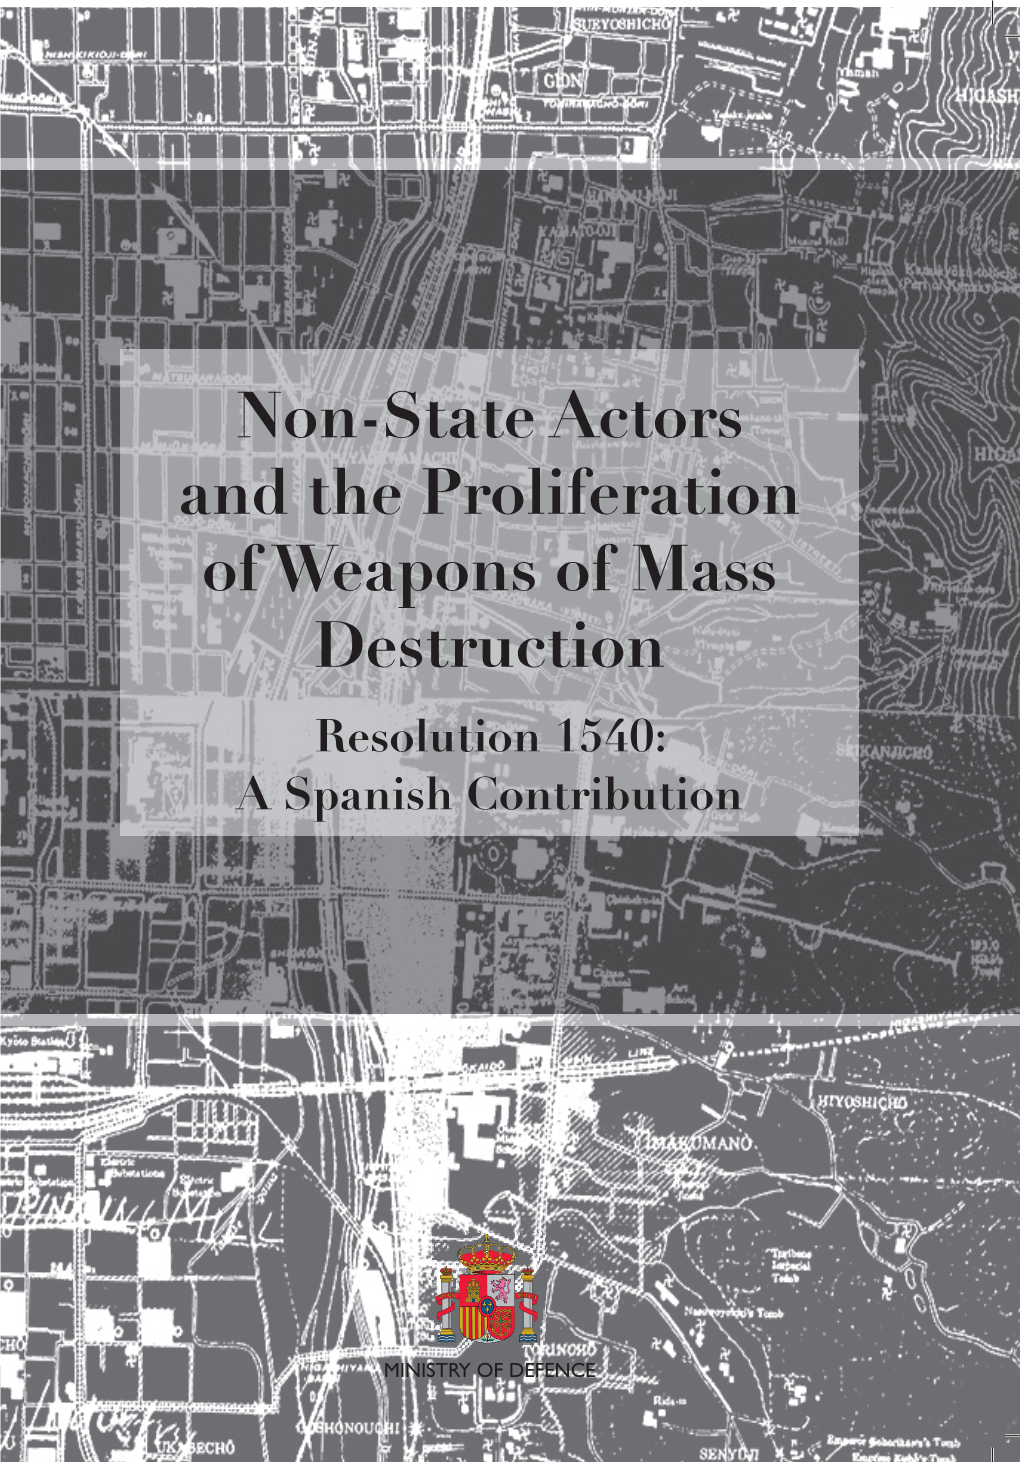 Non-State Actors and the Proliferation of Weapons of Mass Destruction